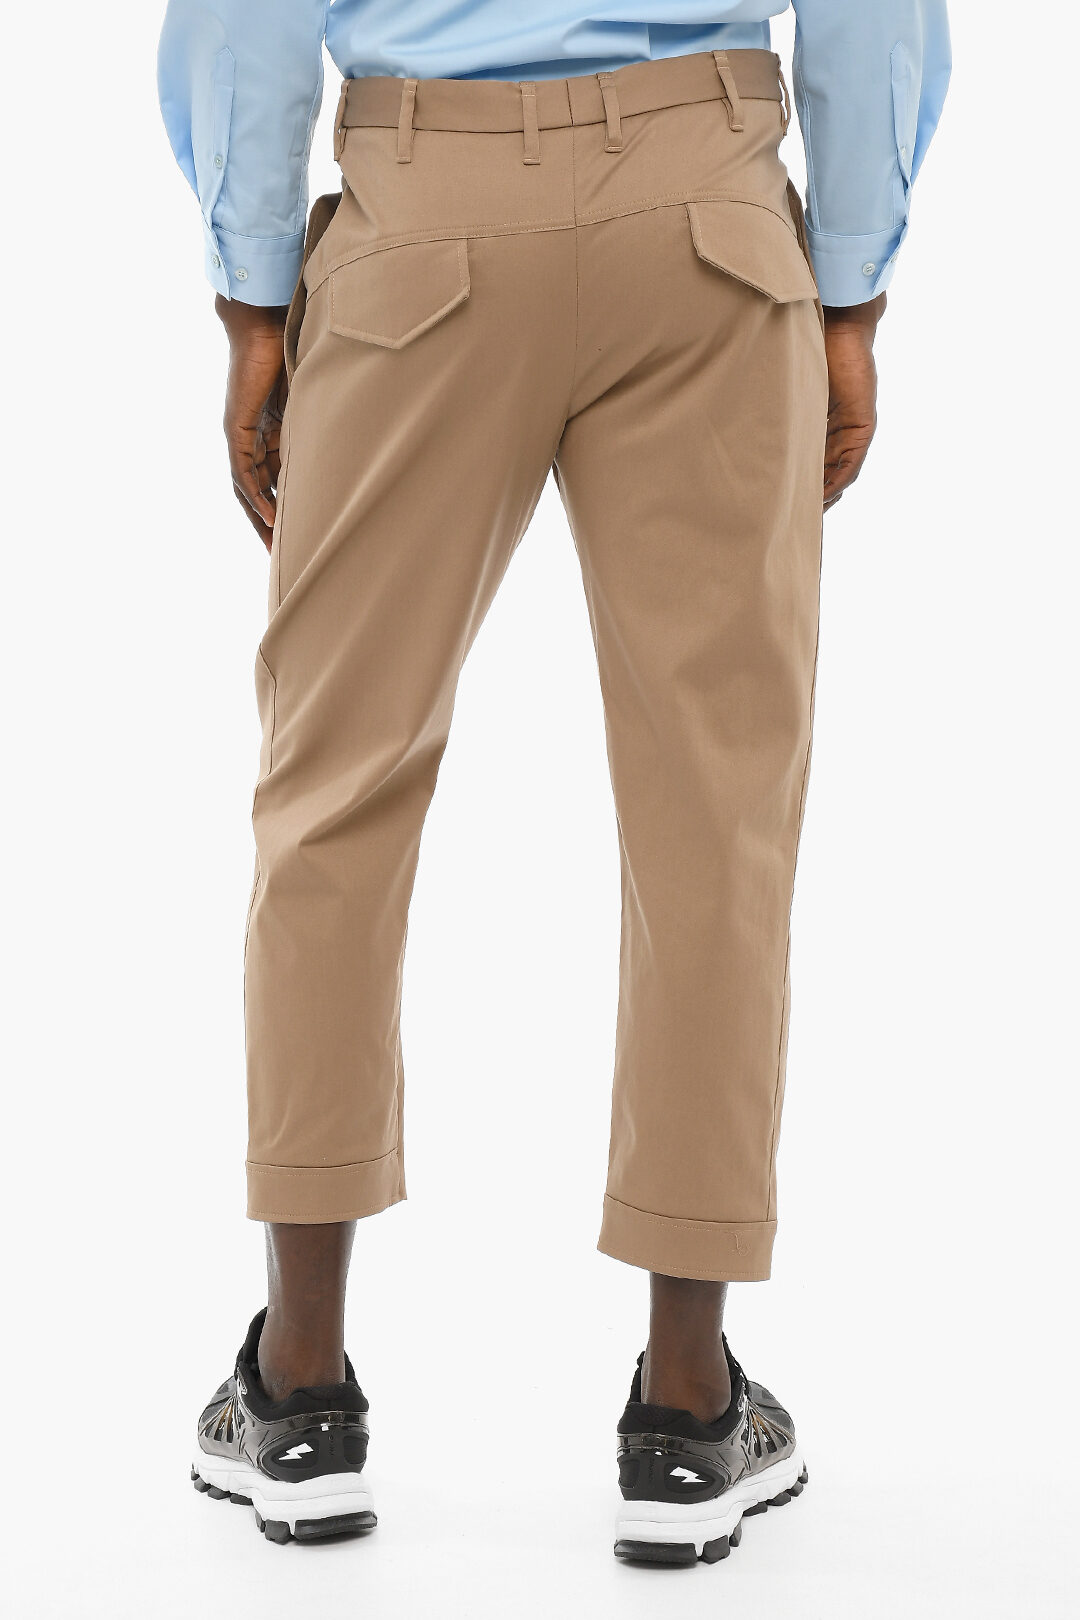 Mens Cargo Work Straight Leg Cargo Pants With Straight Leg, Loose Fit, Wide  Overalls, Side Multi Pockets, And Wide Fit For Summer Big Size From  Longmian, $29.29 | DHgate.Com